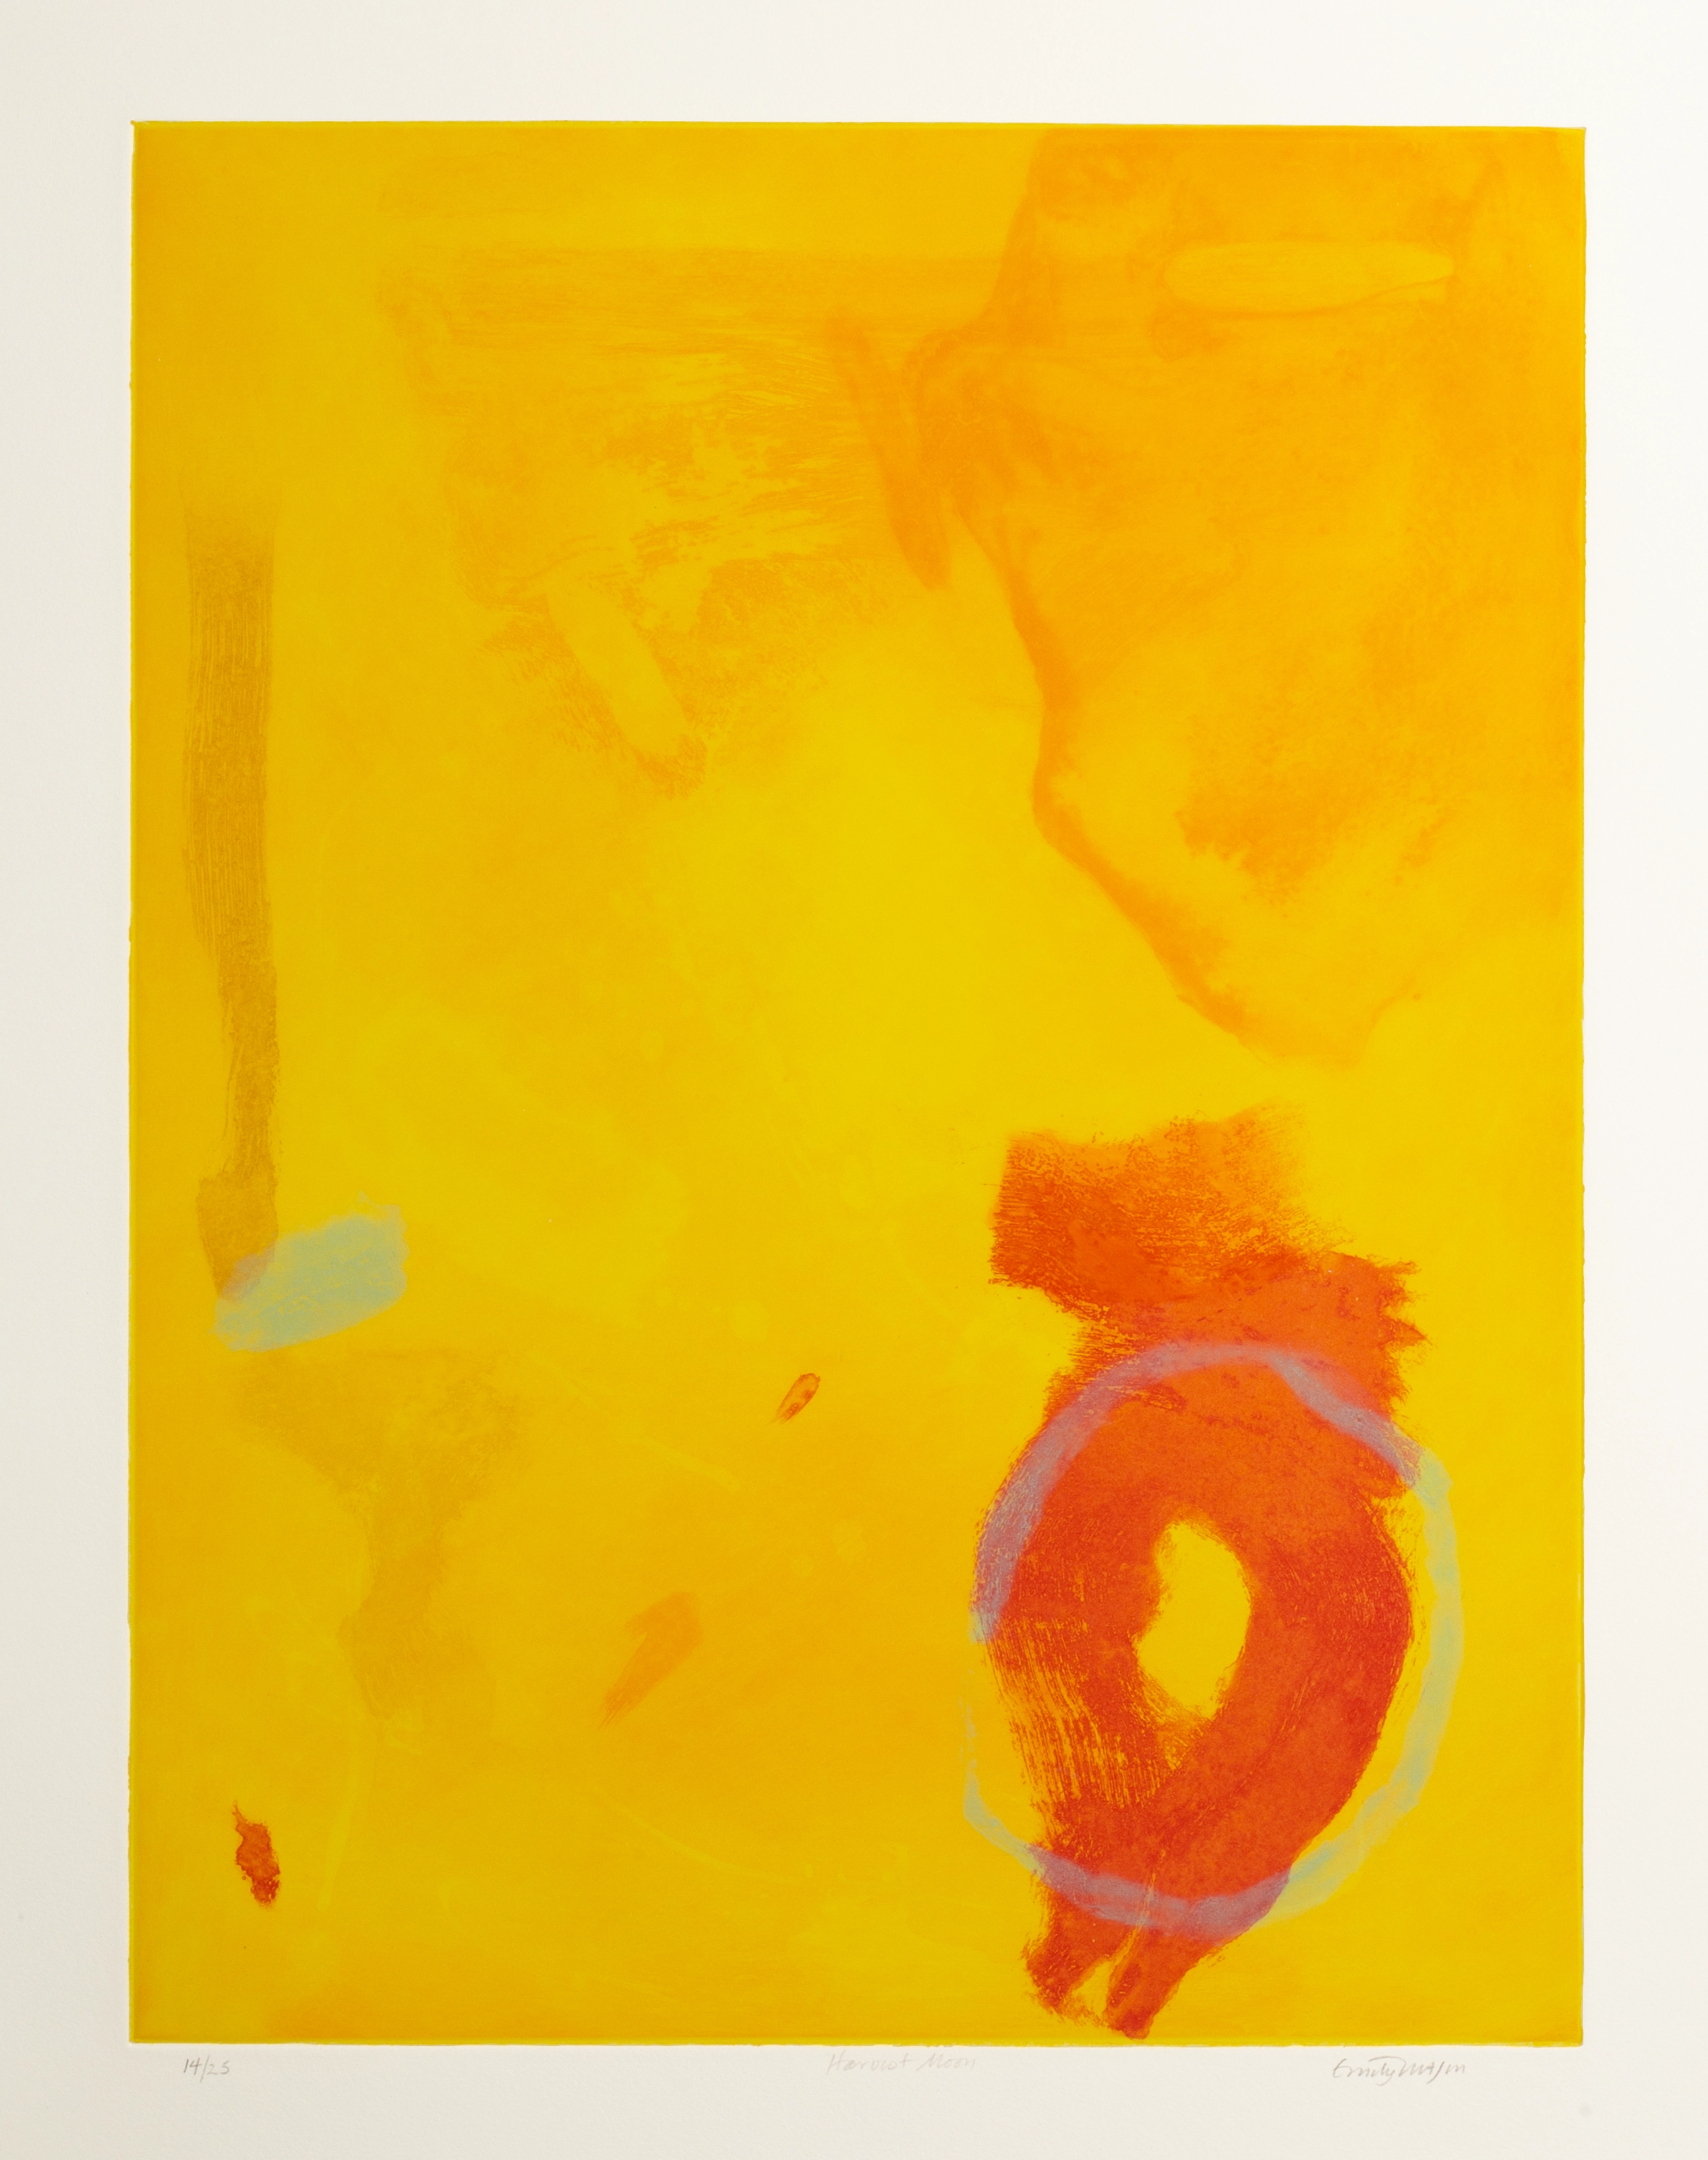 A yellow print on paper, with a circular red-orange form in the bottom right.